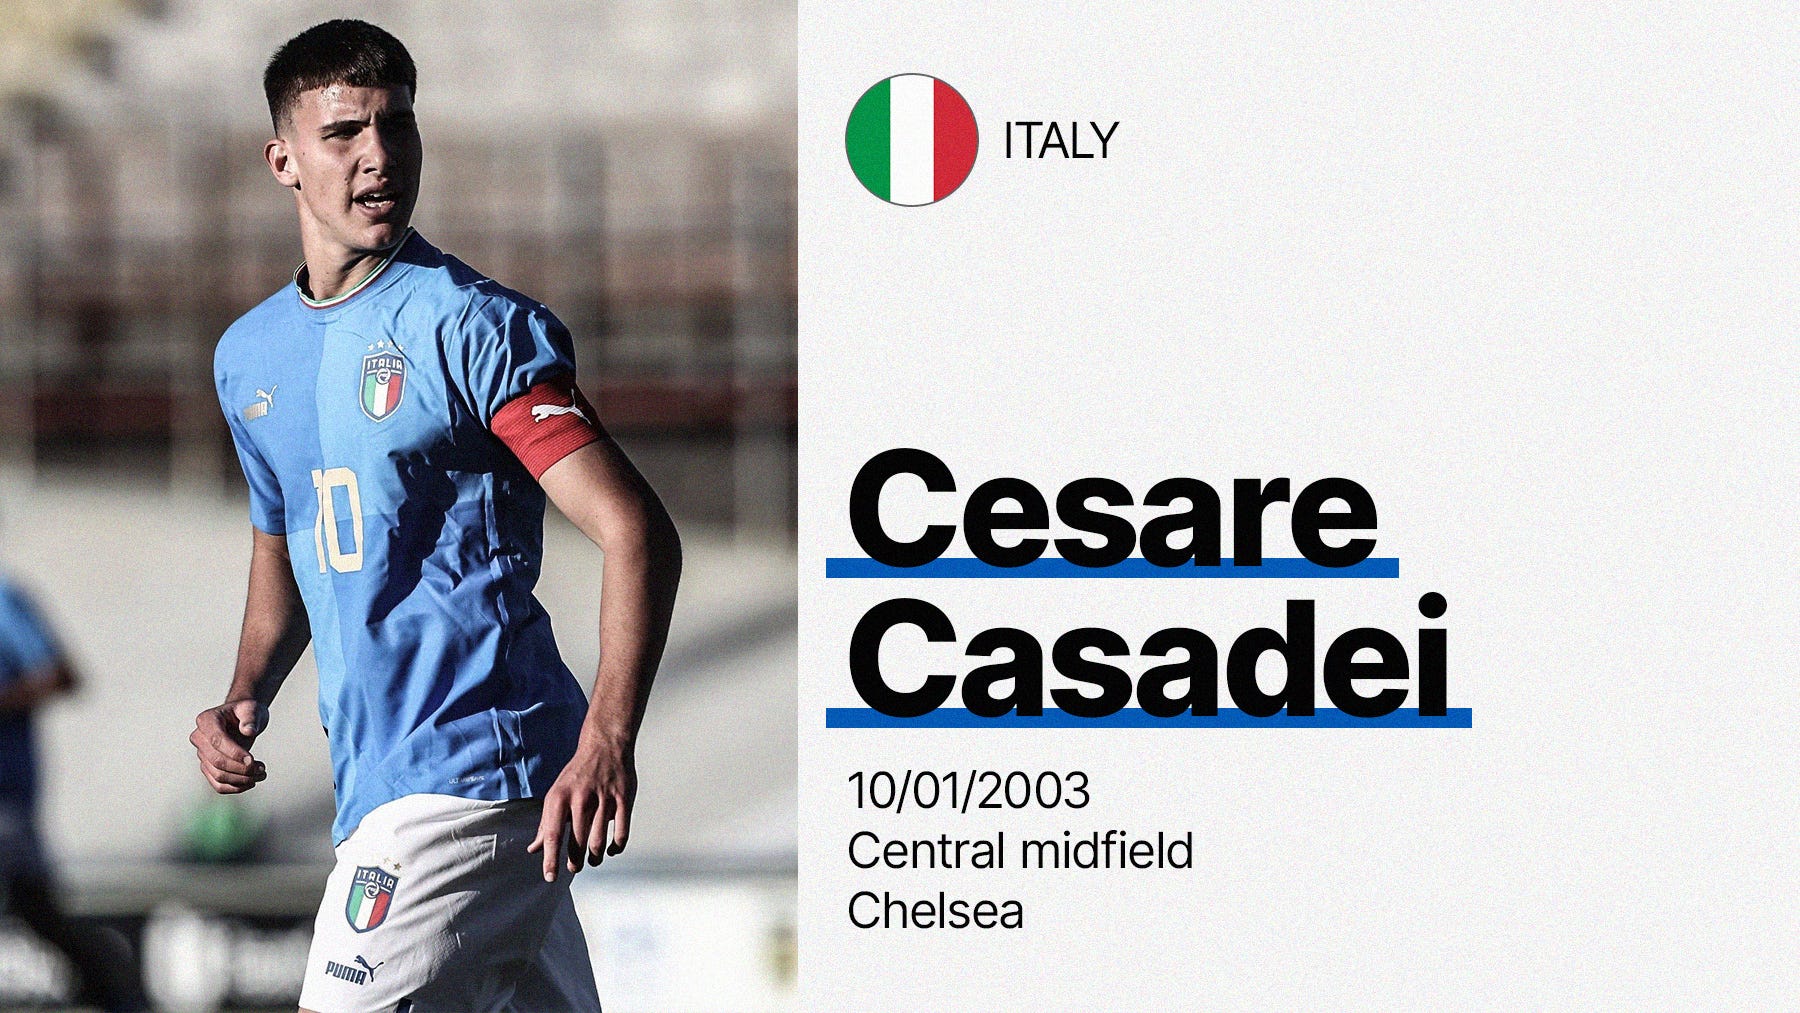 A photo of Cesare Casadei captaining Italy's U-20 team with a brief information panel about him, including Japan flag, date of birth, position and club.